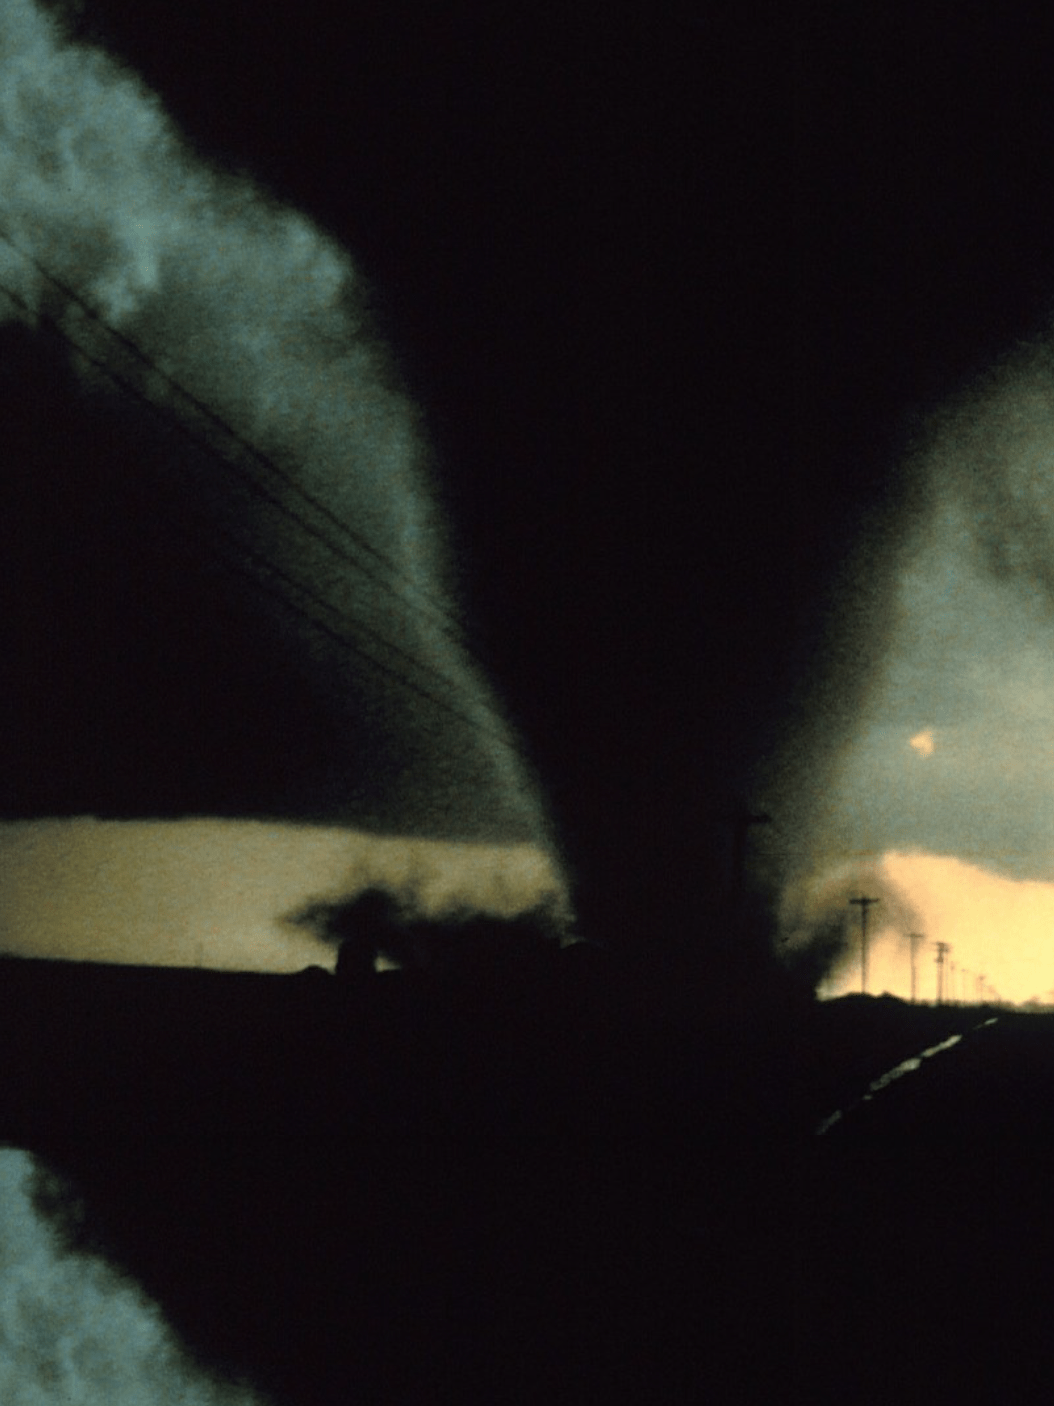 TORNADOES: What To Do and Not To Do